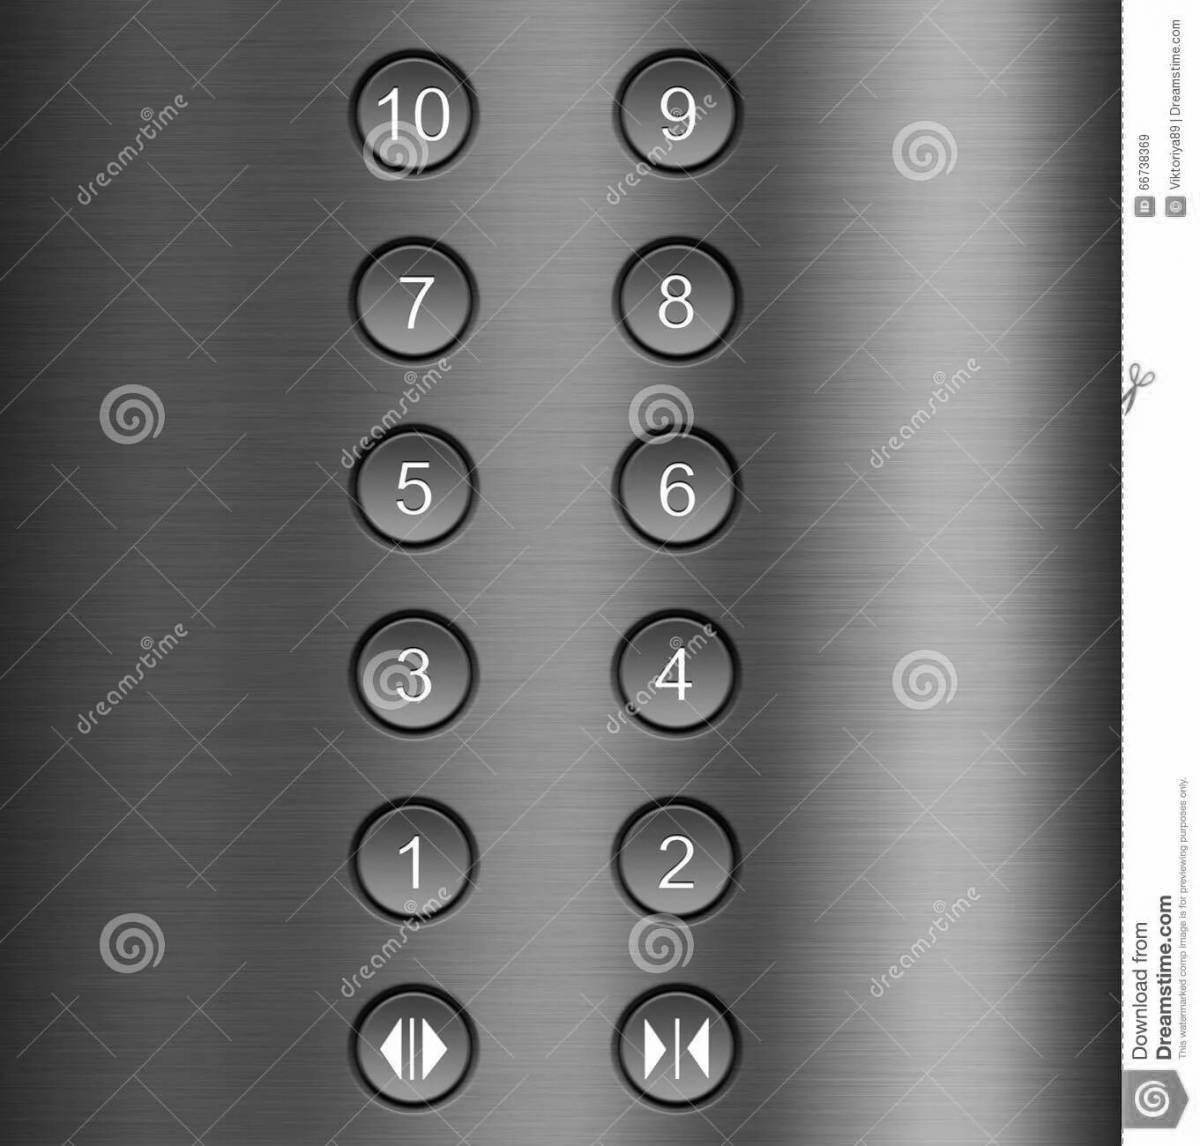 Coloring shiny elevator buttons